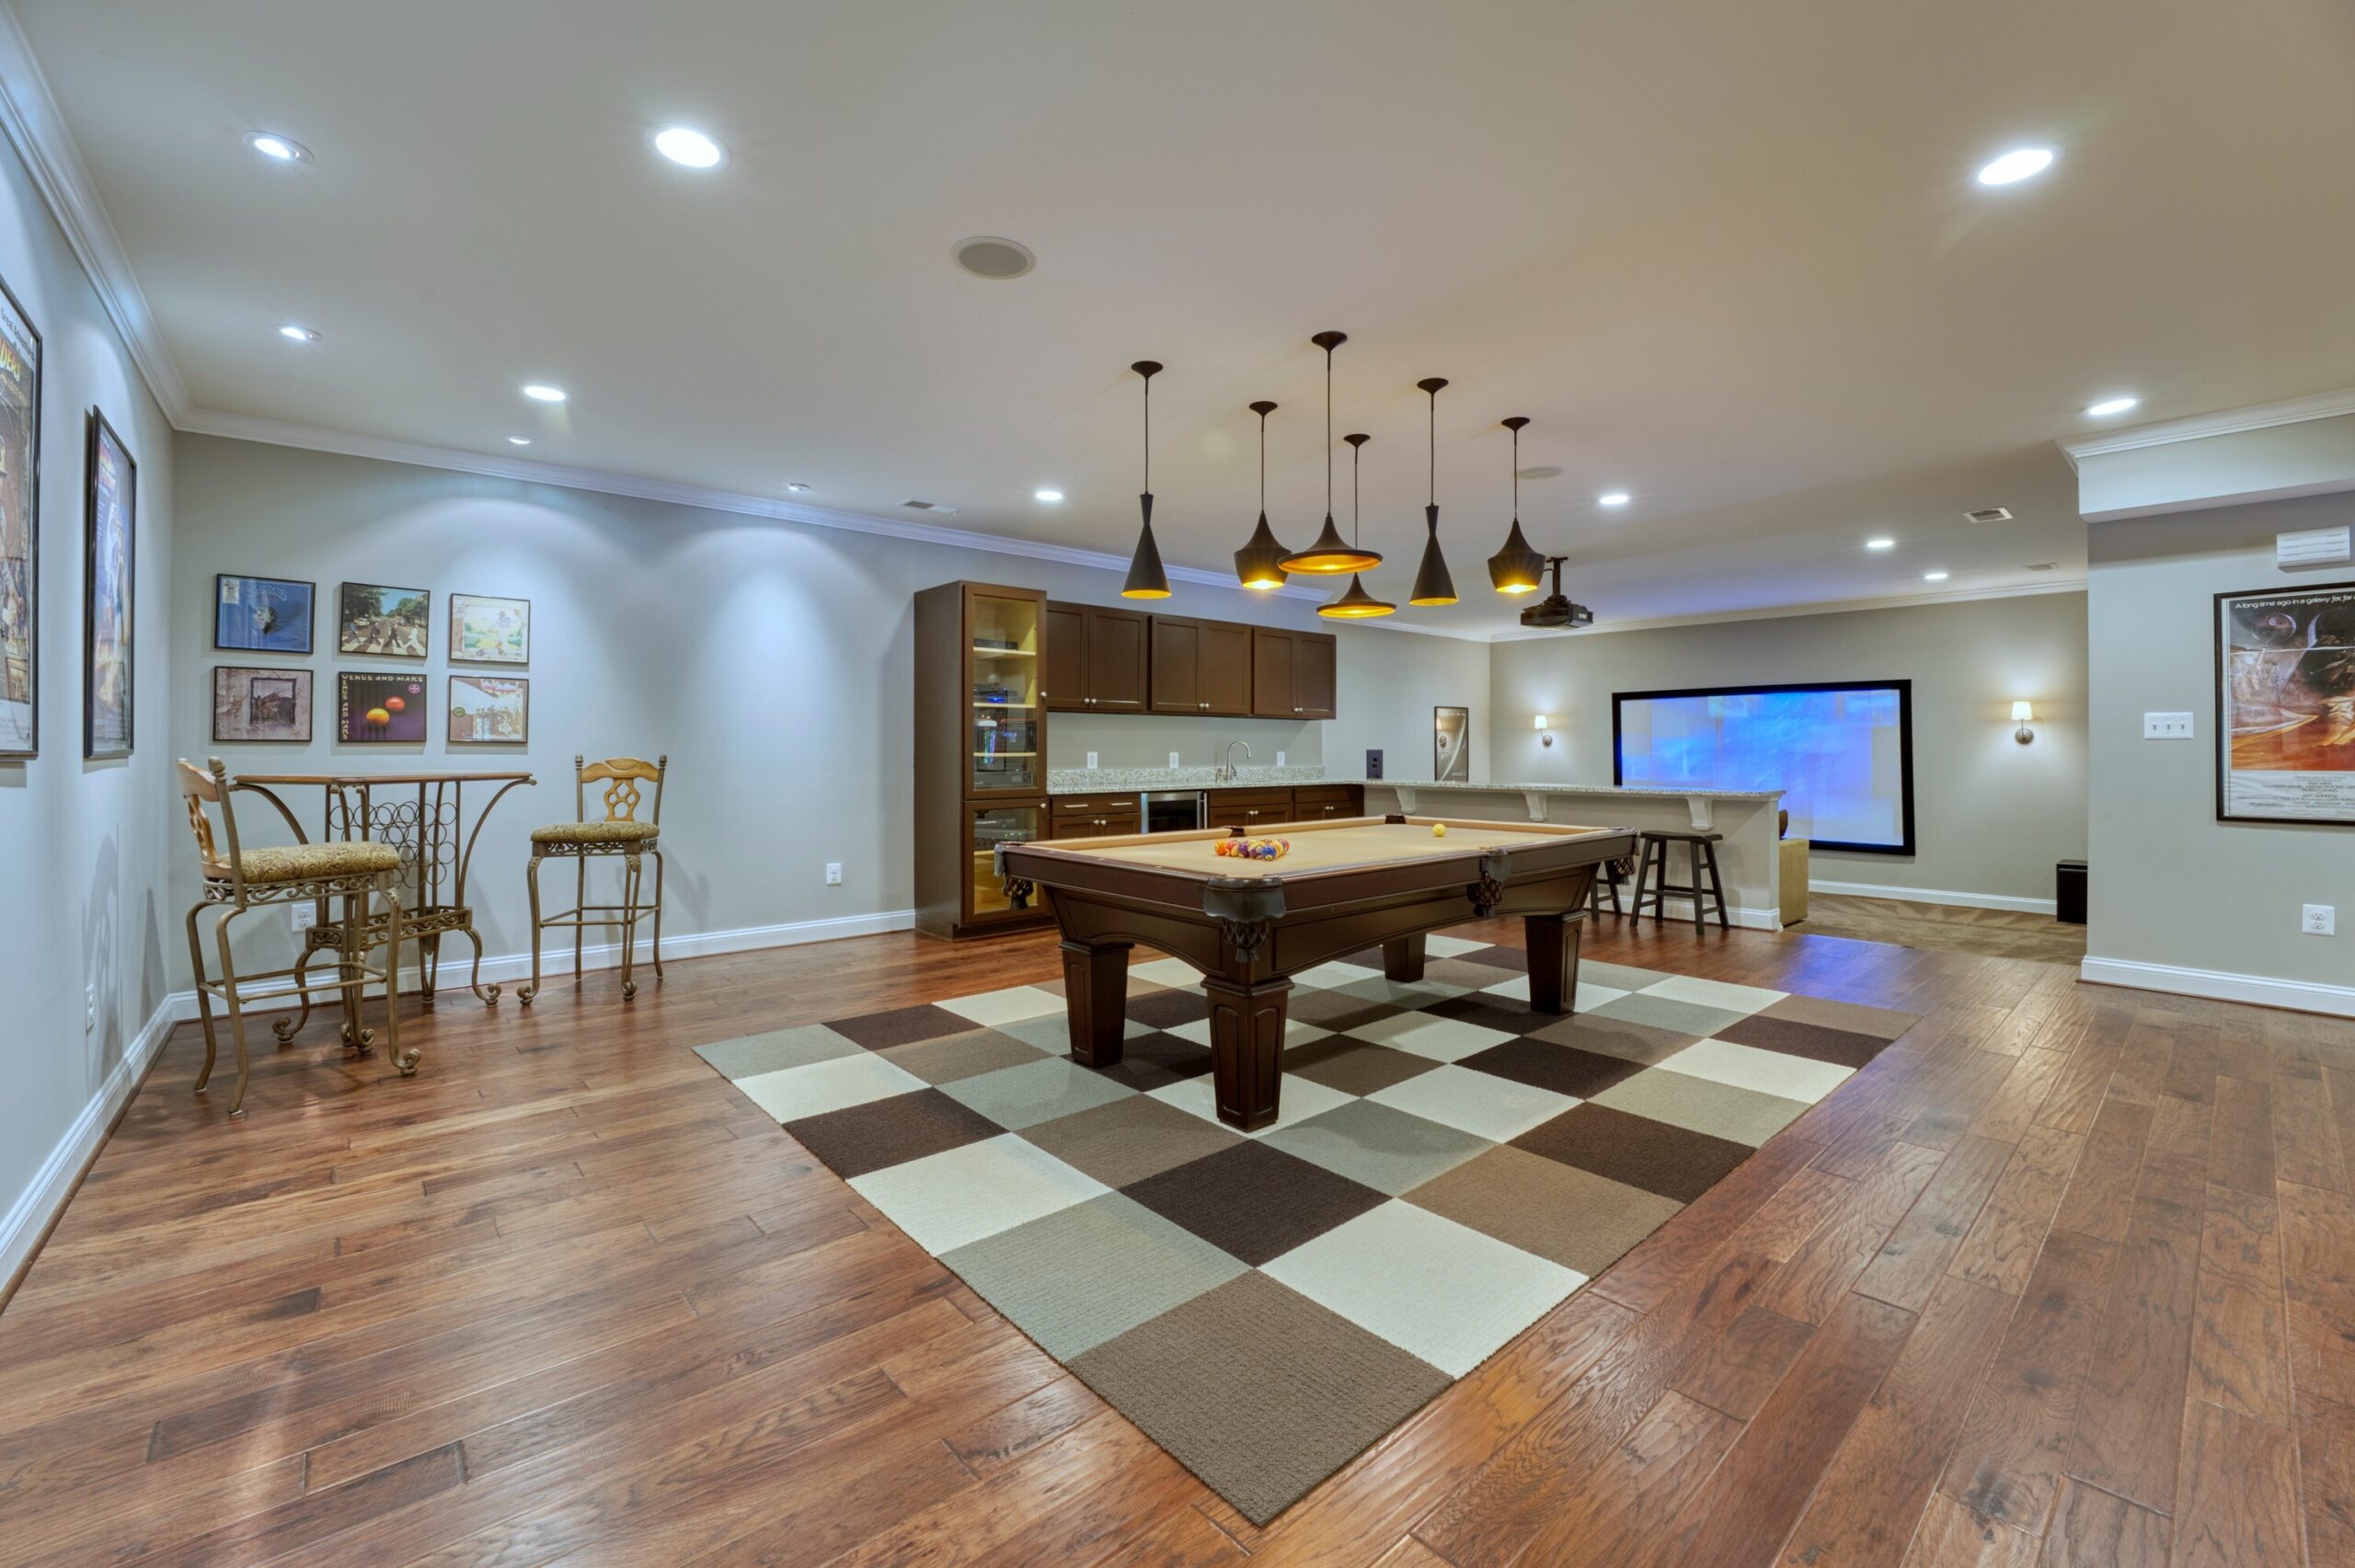 Professional interior photo of 40046 Mount Gilead Rd in Leesburg, Virginia - showing the billiards room with bar table and stools, bar area and media room in the background